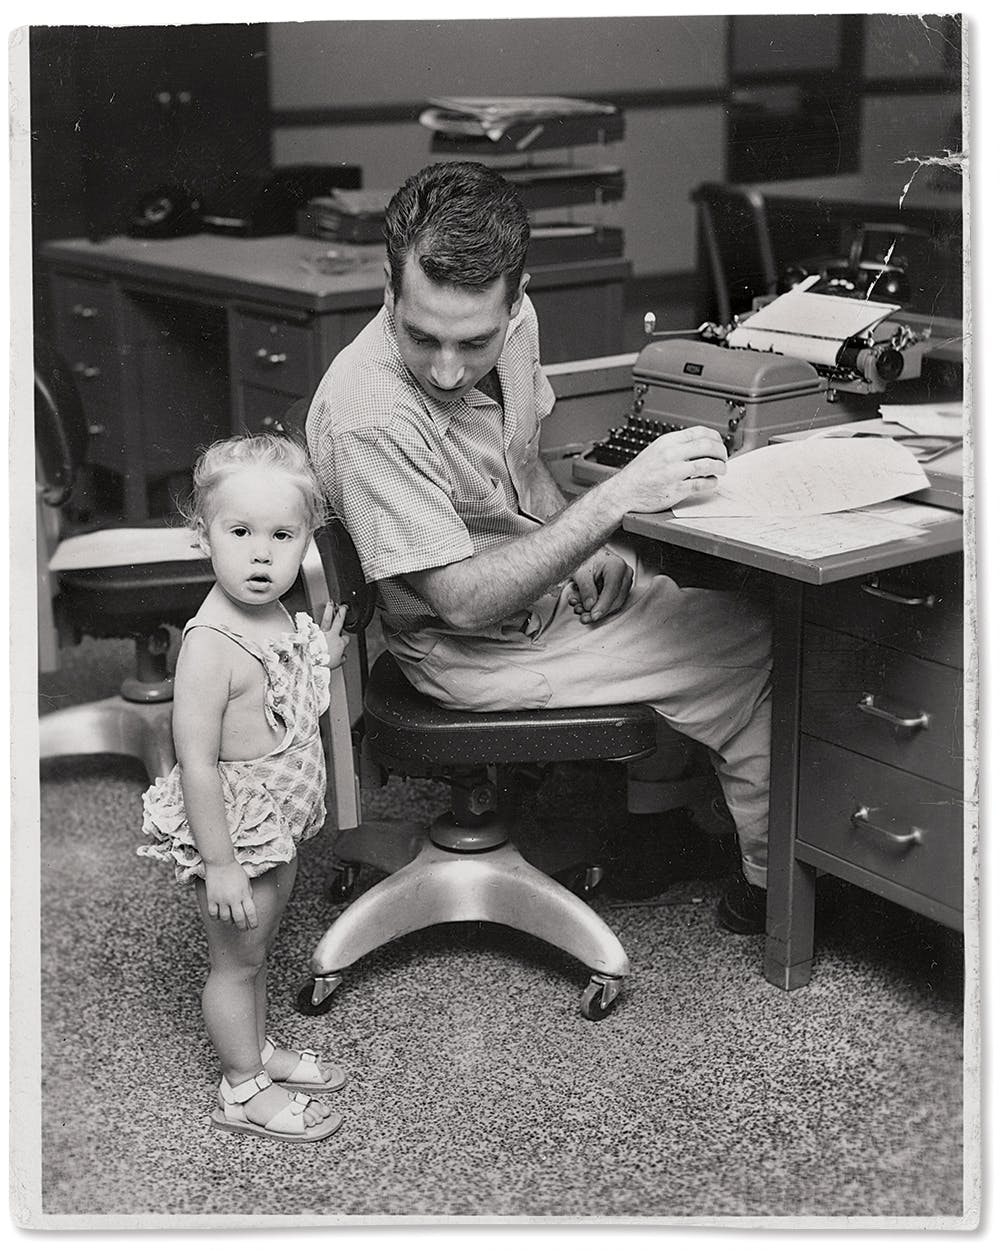 Brammer with his daughter Sidney in Austin, in the early fifties.